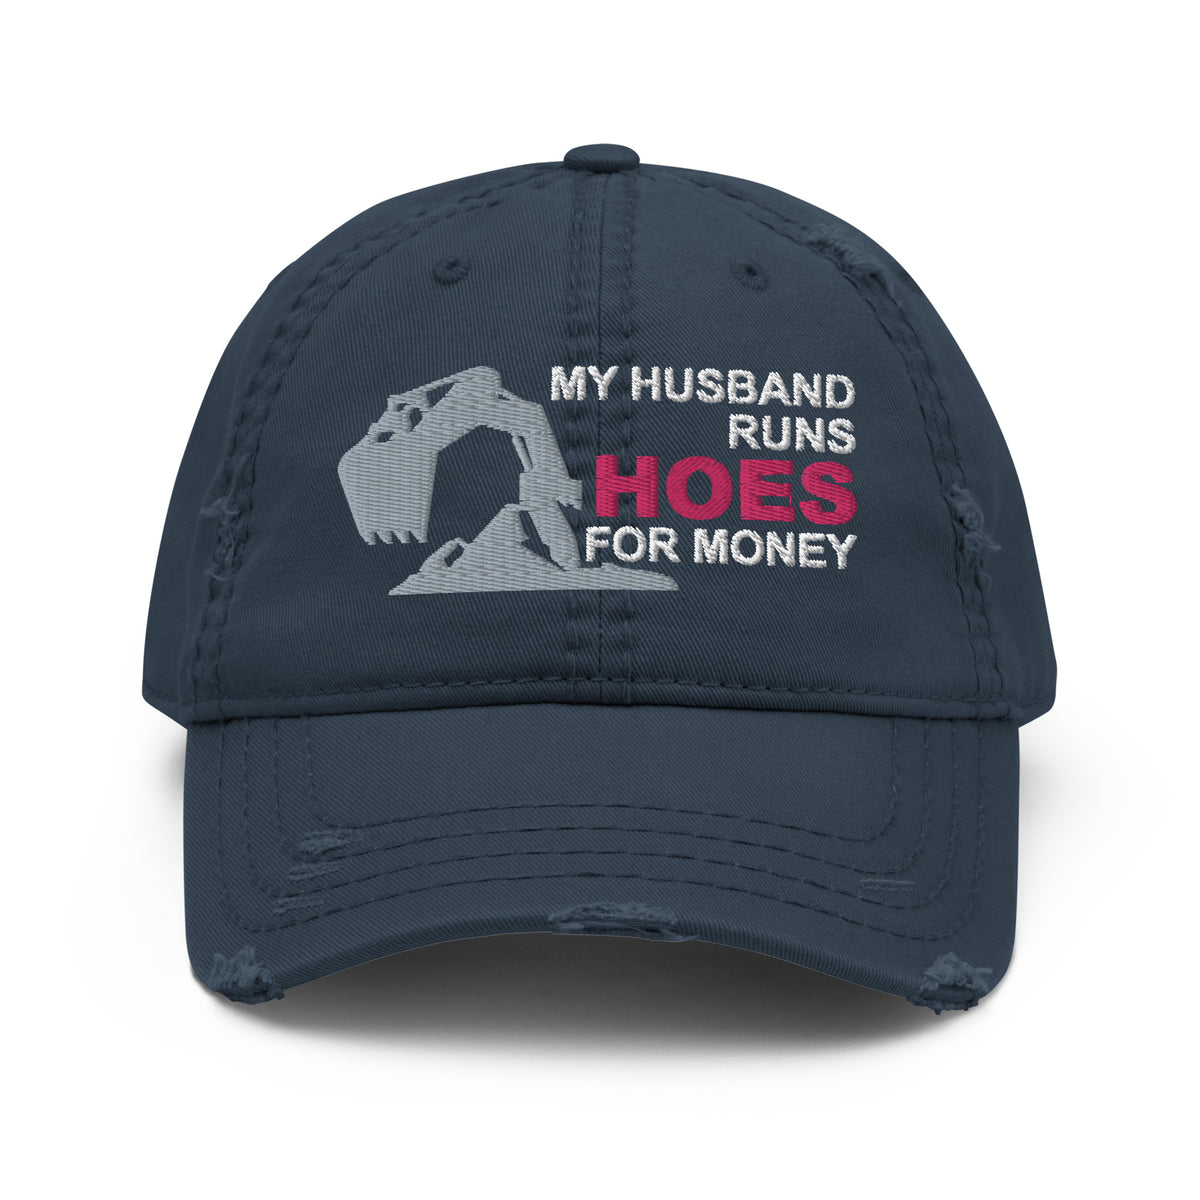 My Husband Runs Hoes for Money - Excavator - Distress Hat - Free Shipping